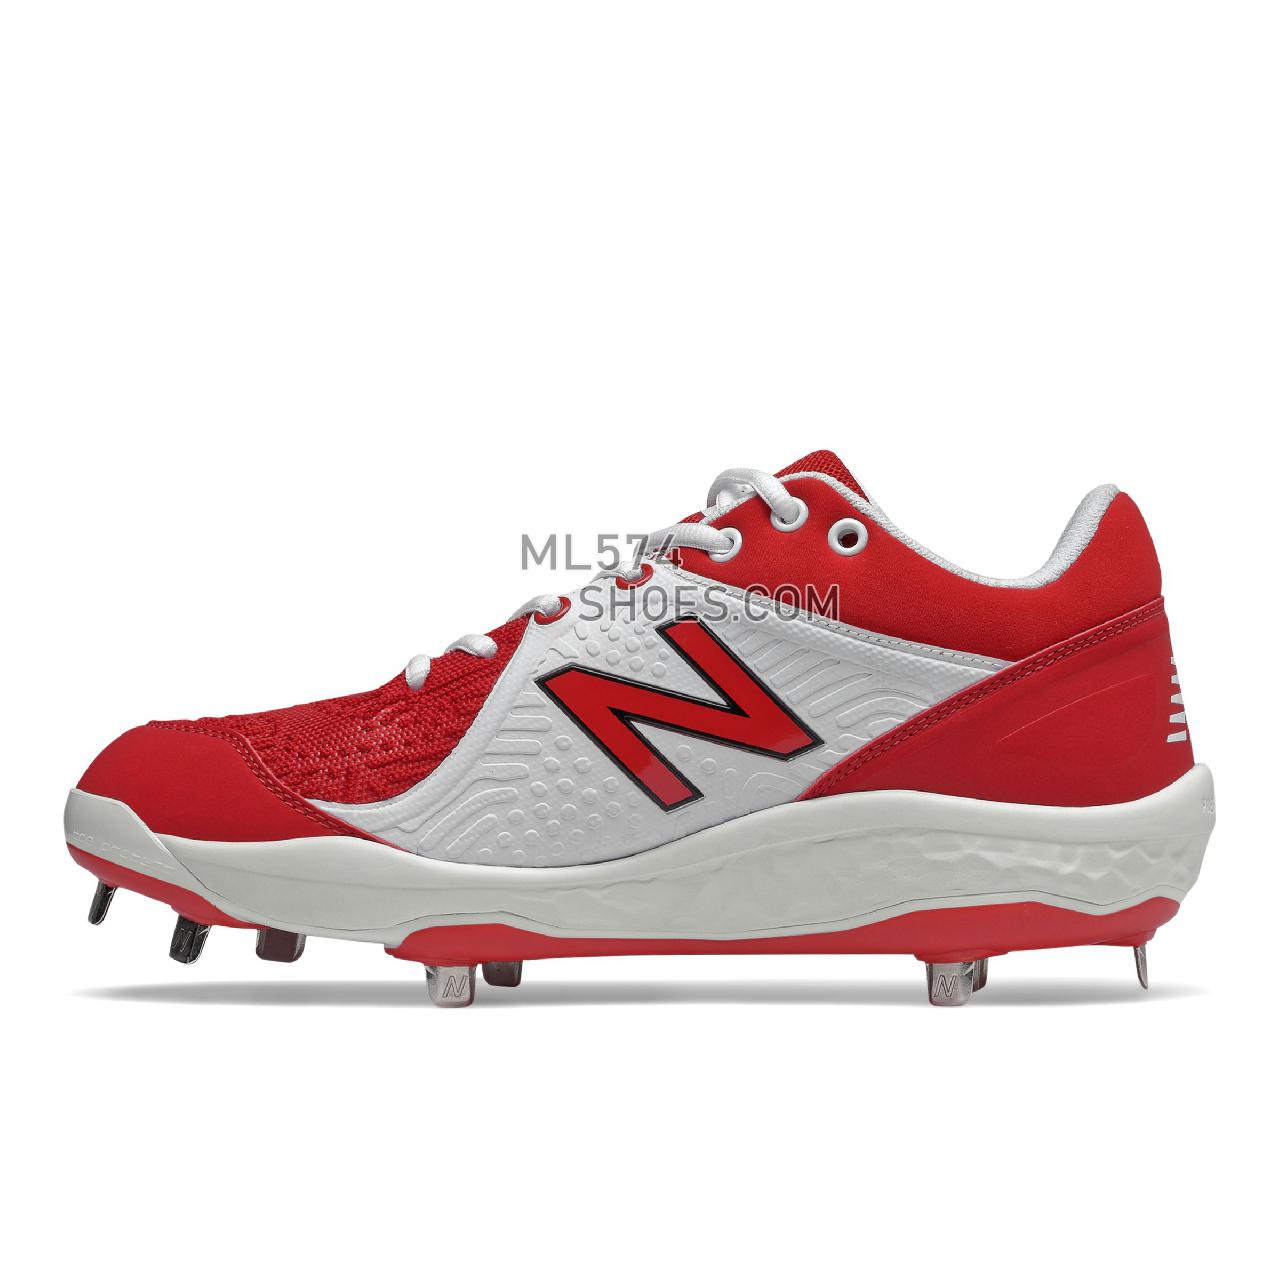 New Balance Fresh Foam 3000 v5 Metal - Men's Mid-Cut Baseball Cleats - Red with White - L3000TR5